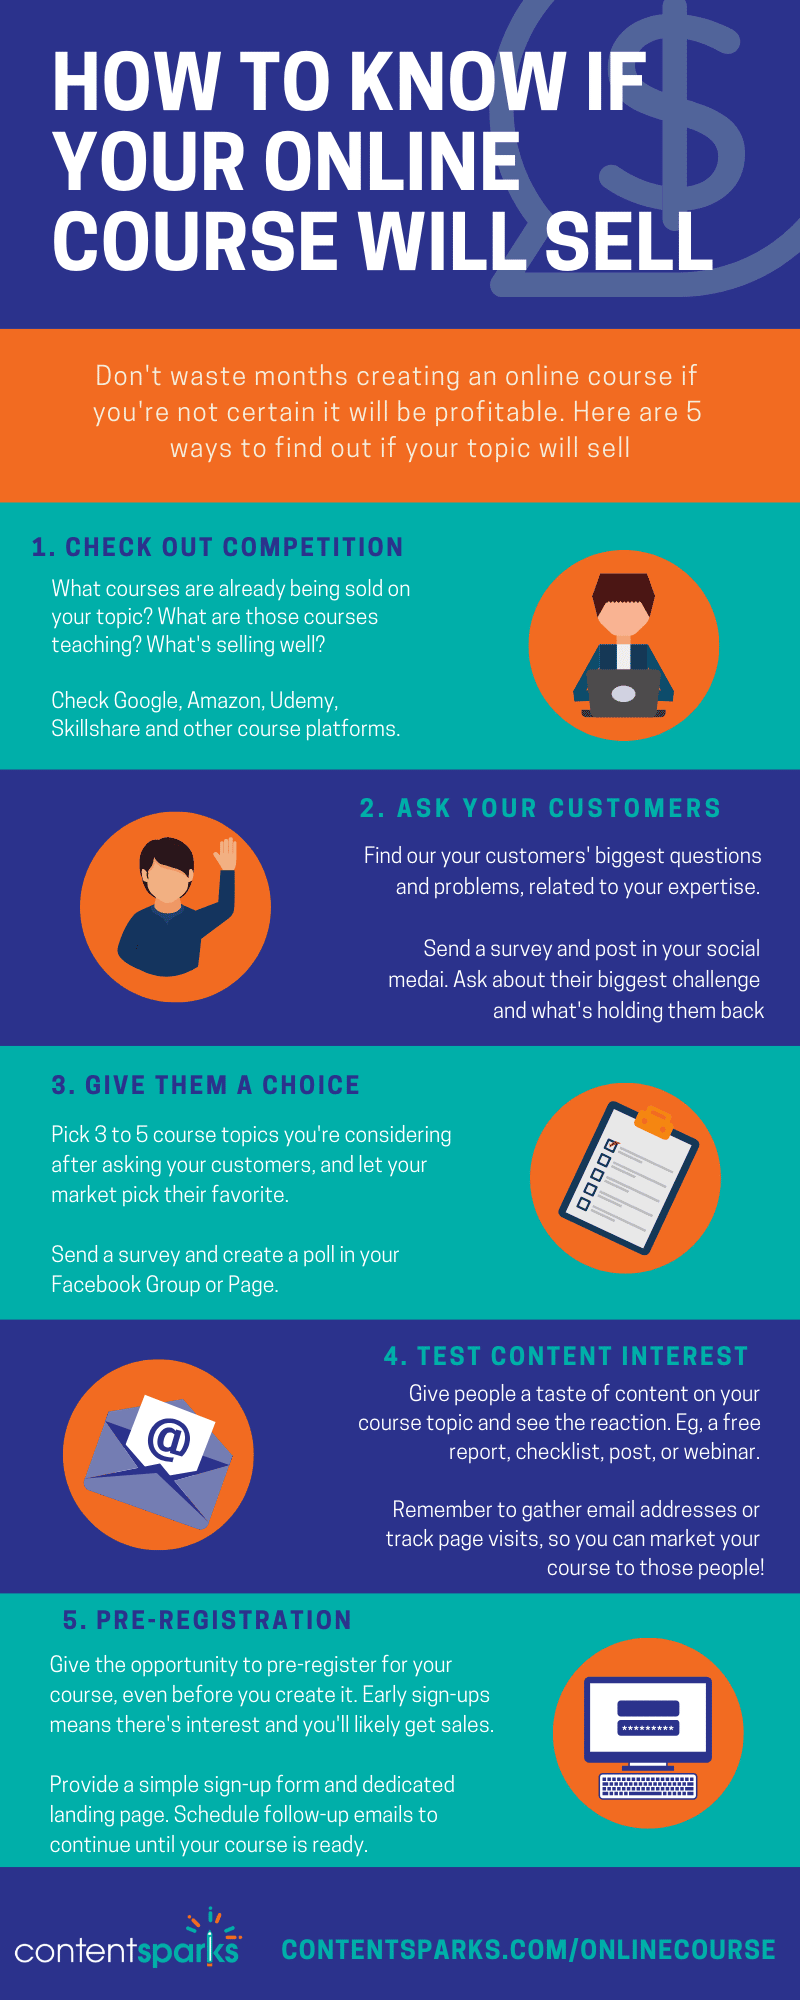 infographic: how to know if your online course will sell